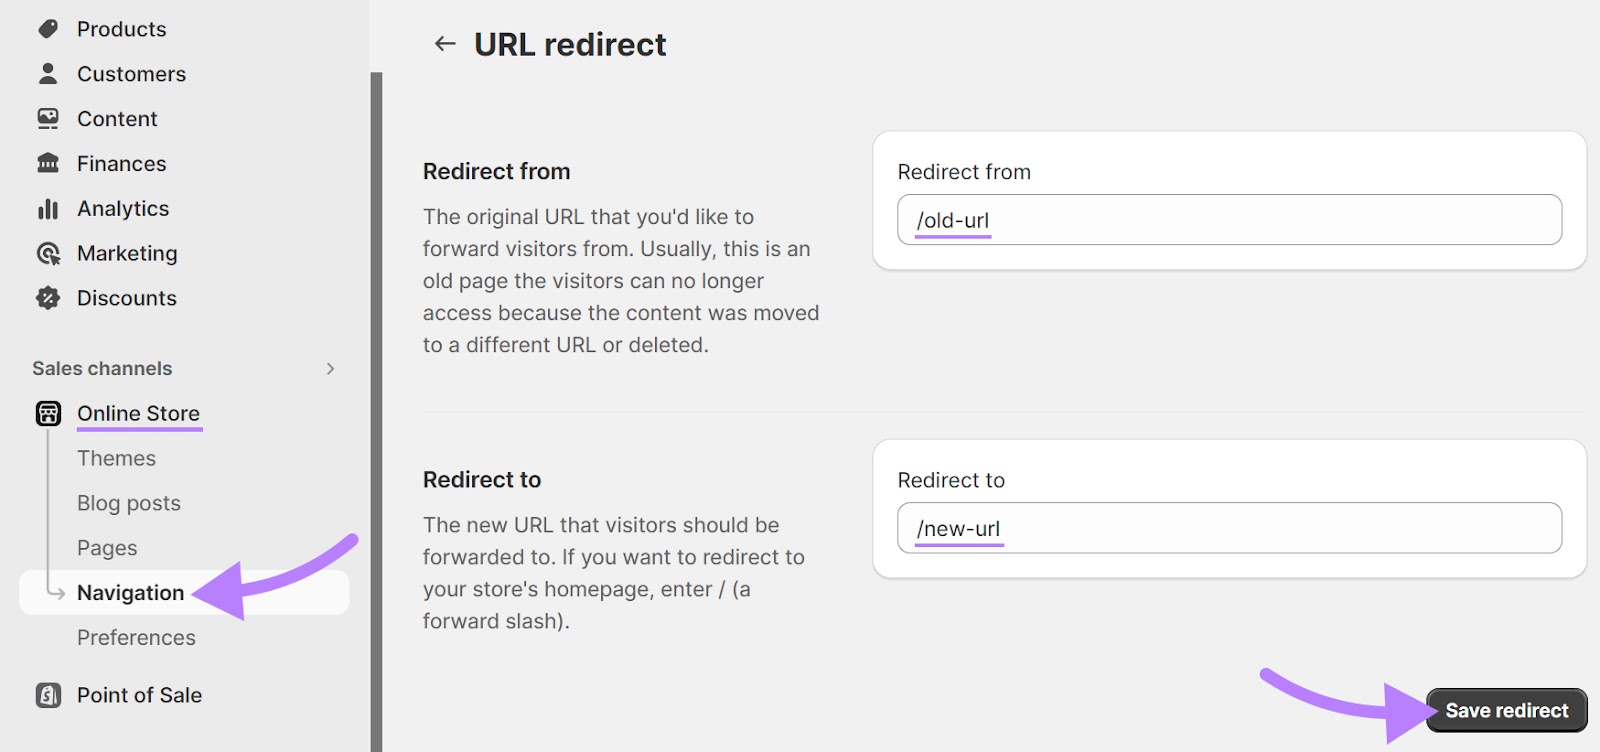 "URL redirect" window with an old URL redirected to a new URL